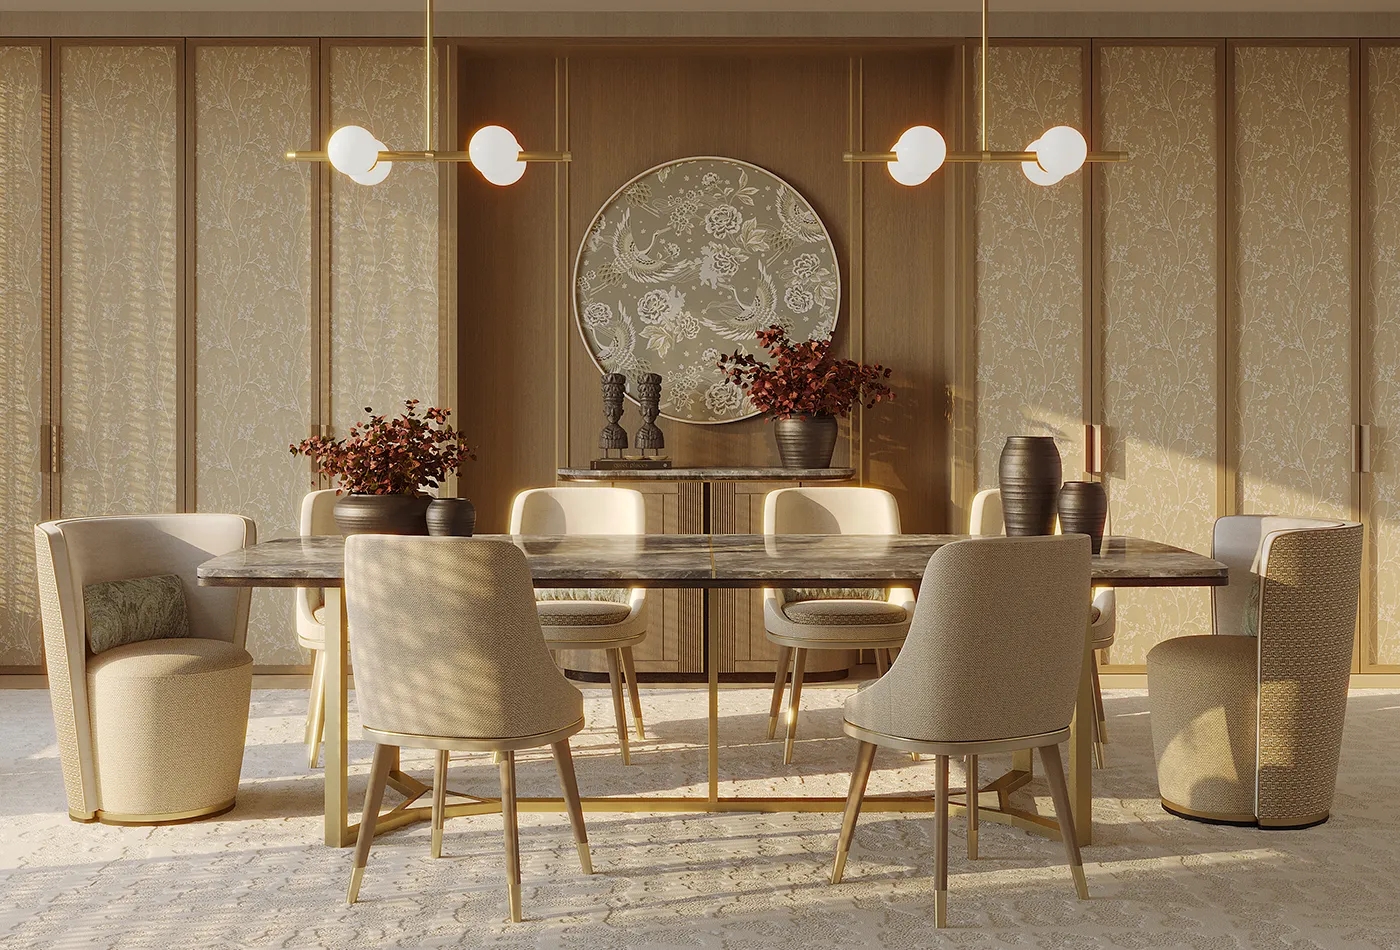 DINING IN OPULENCE - Dining Rooms